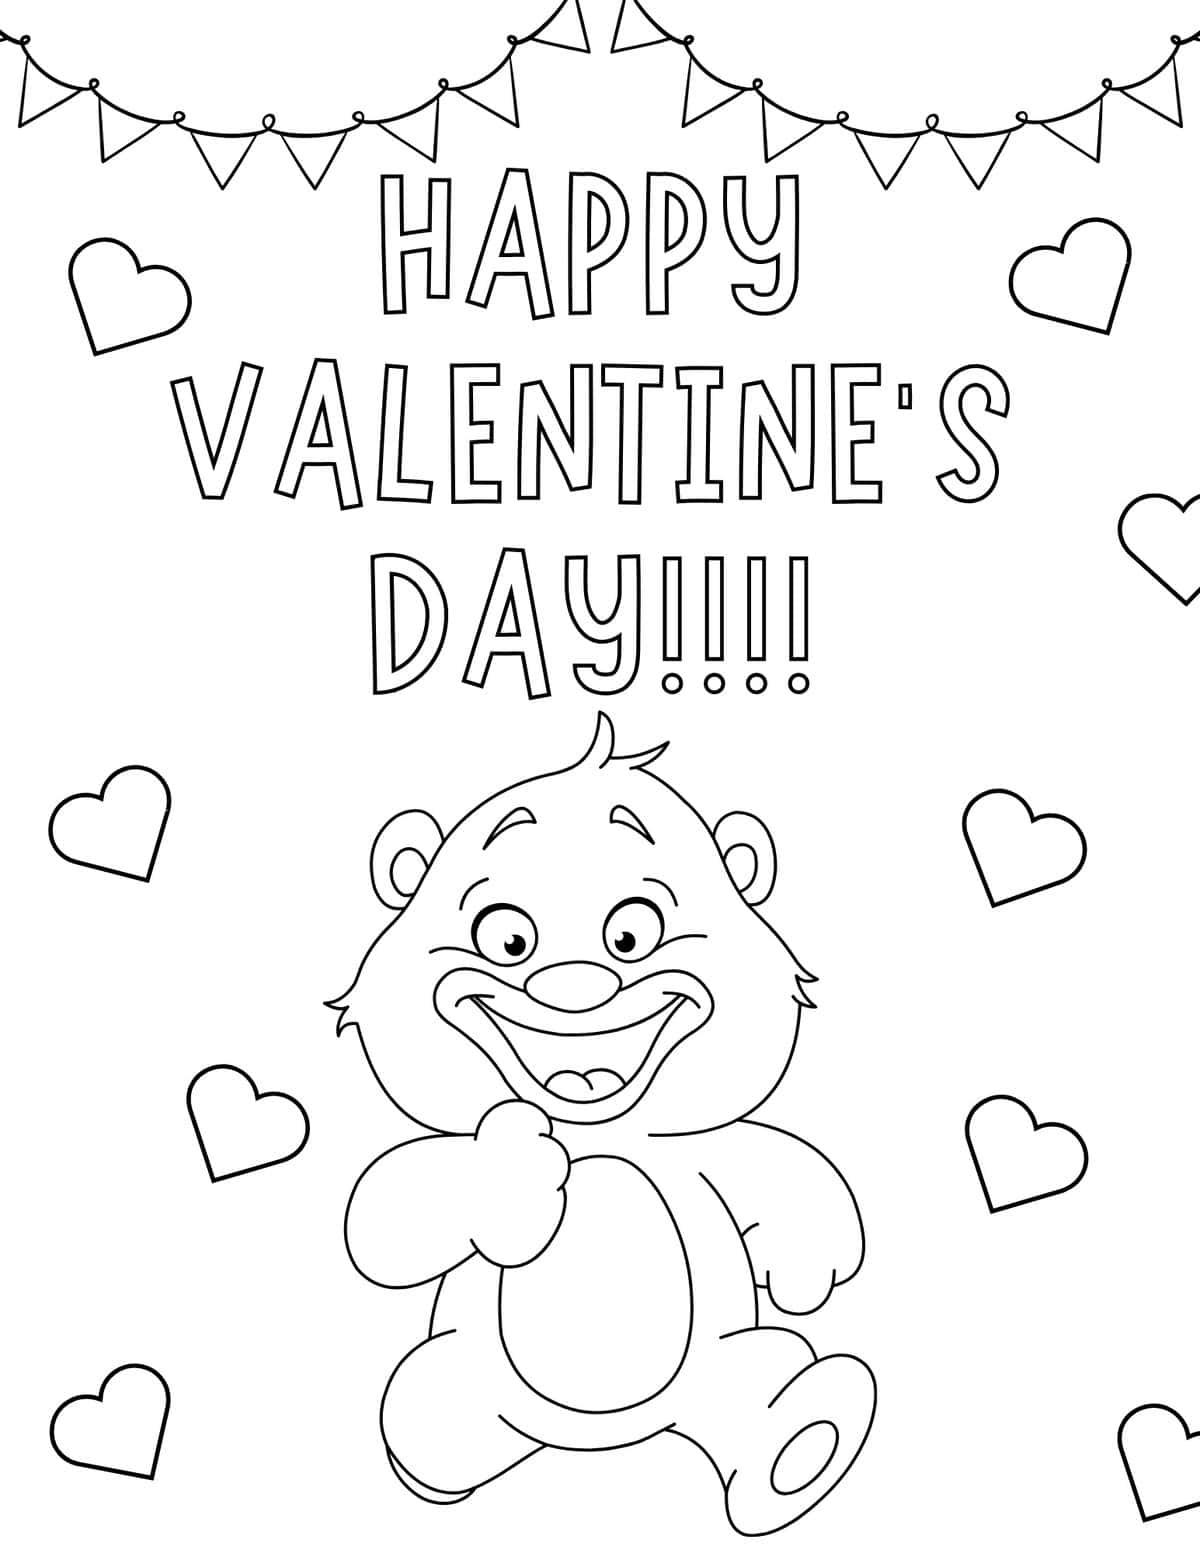 happy Valentine's Day teddy bear coloring page